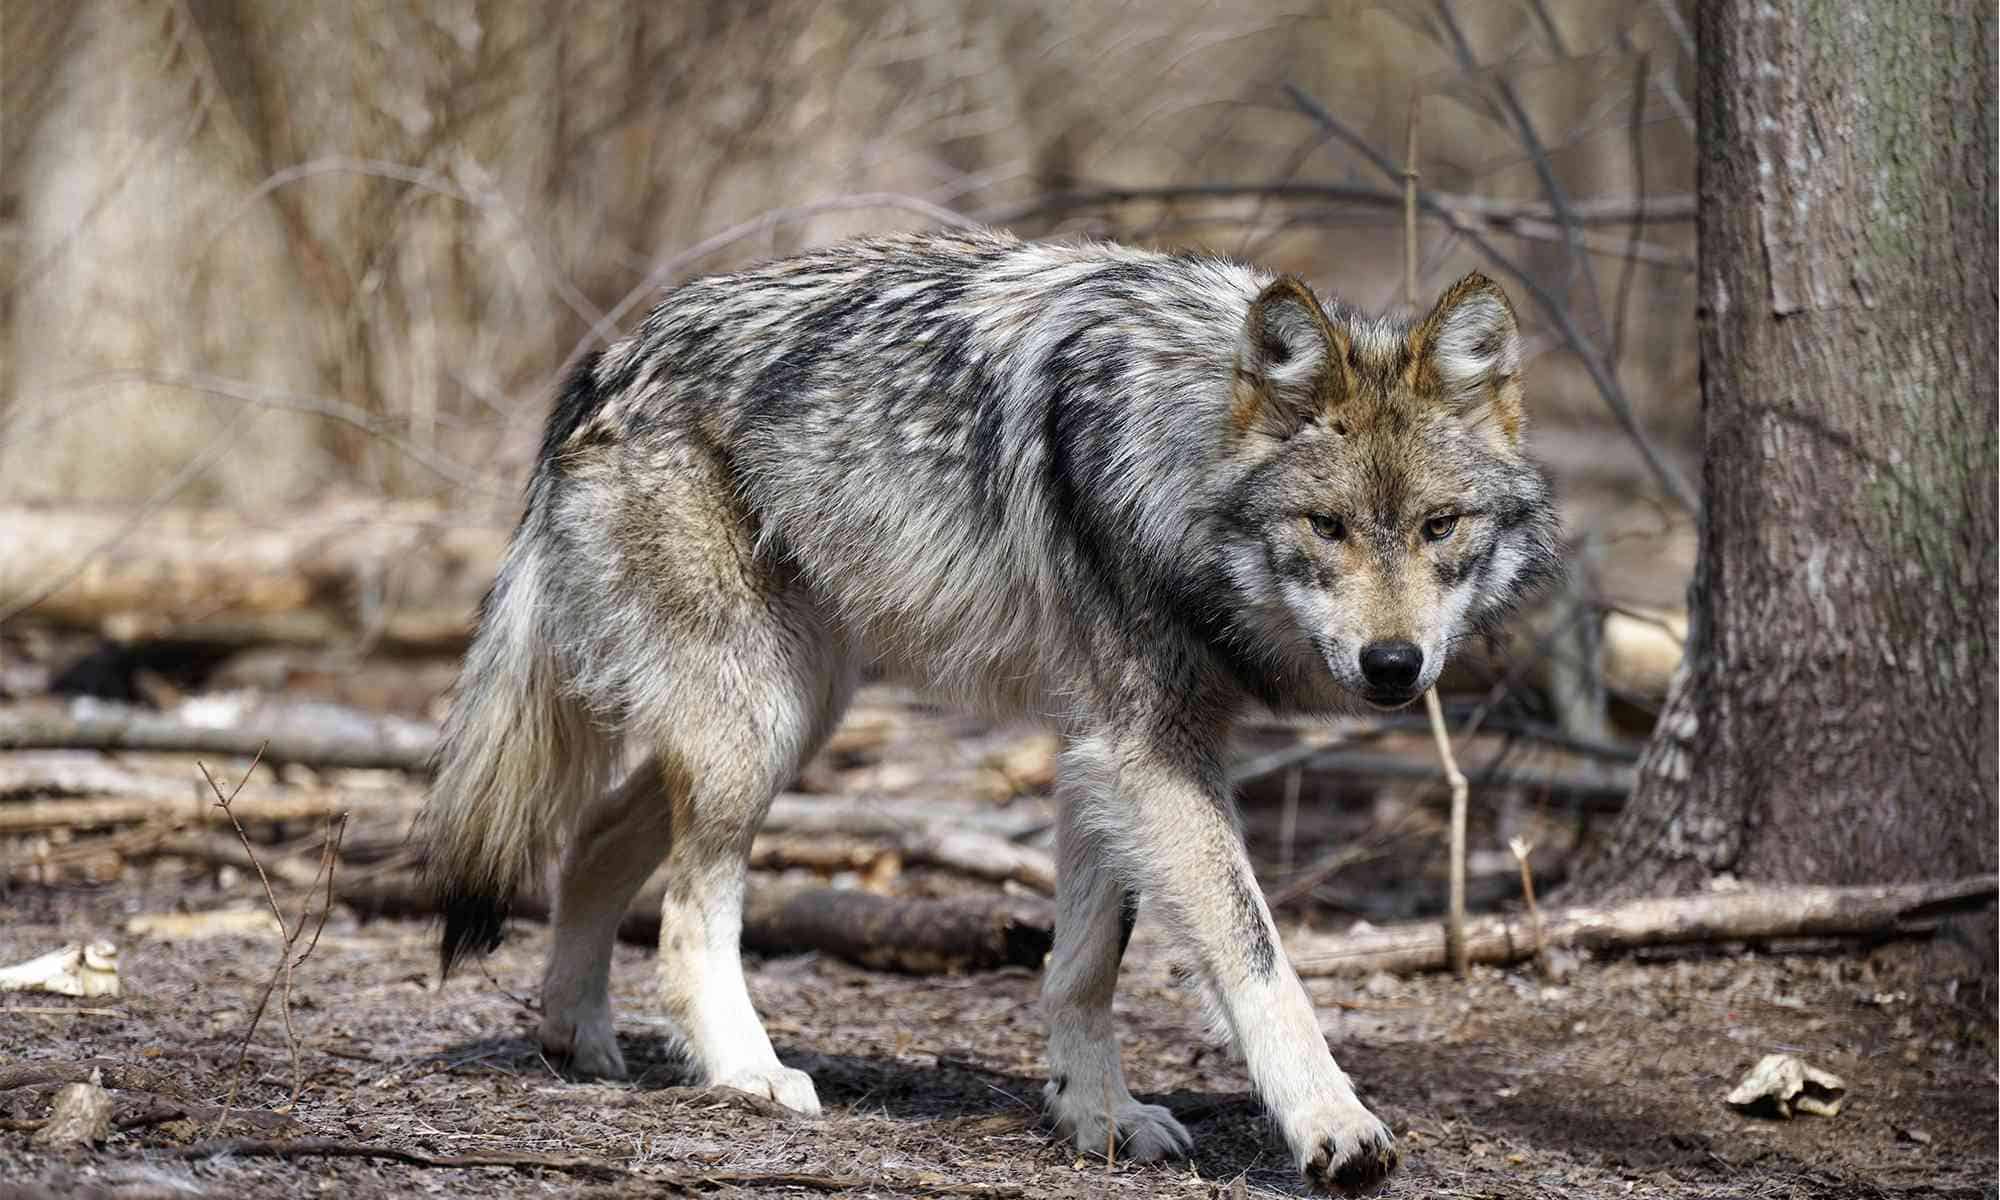 More on Wildlife Services’ sketchy depredation reports blaming Mexican gray wolves for livestock kills